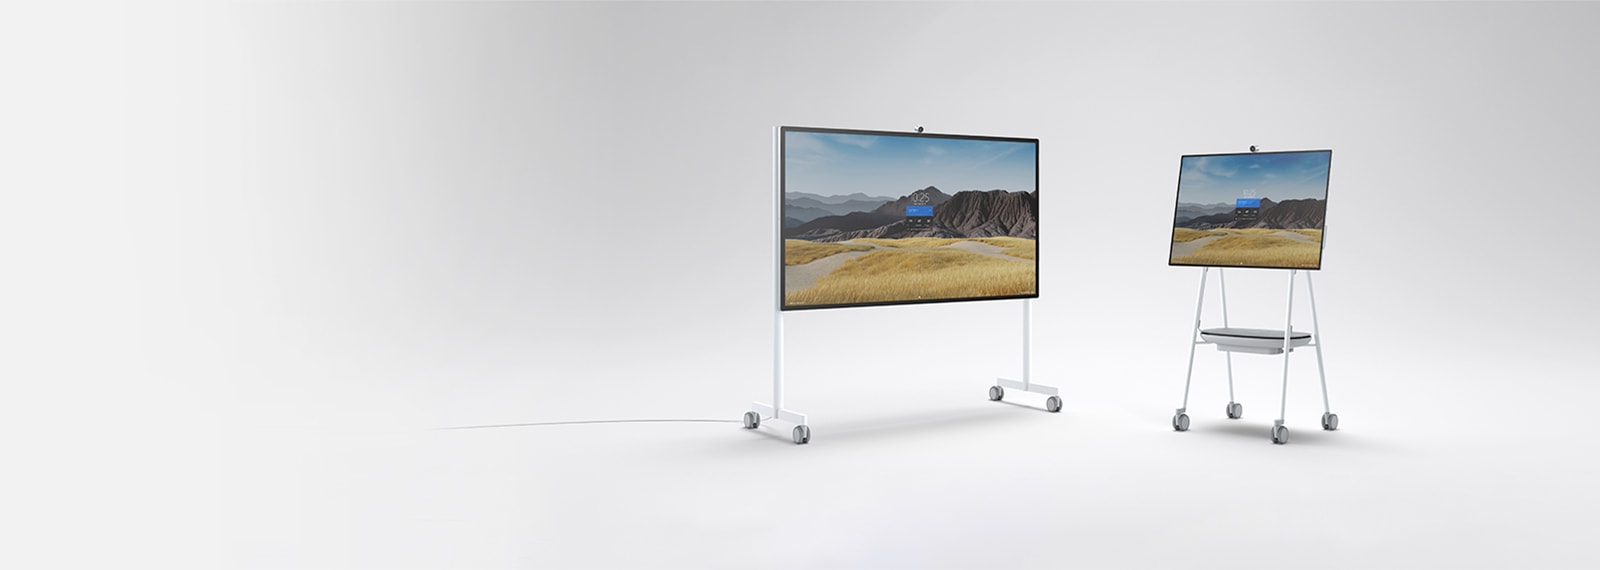 Hub 2S 85-inch and 50-inch sizes side-by-side